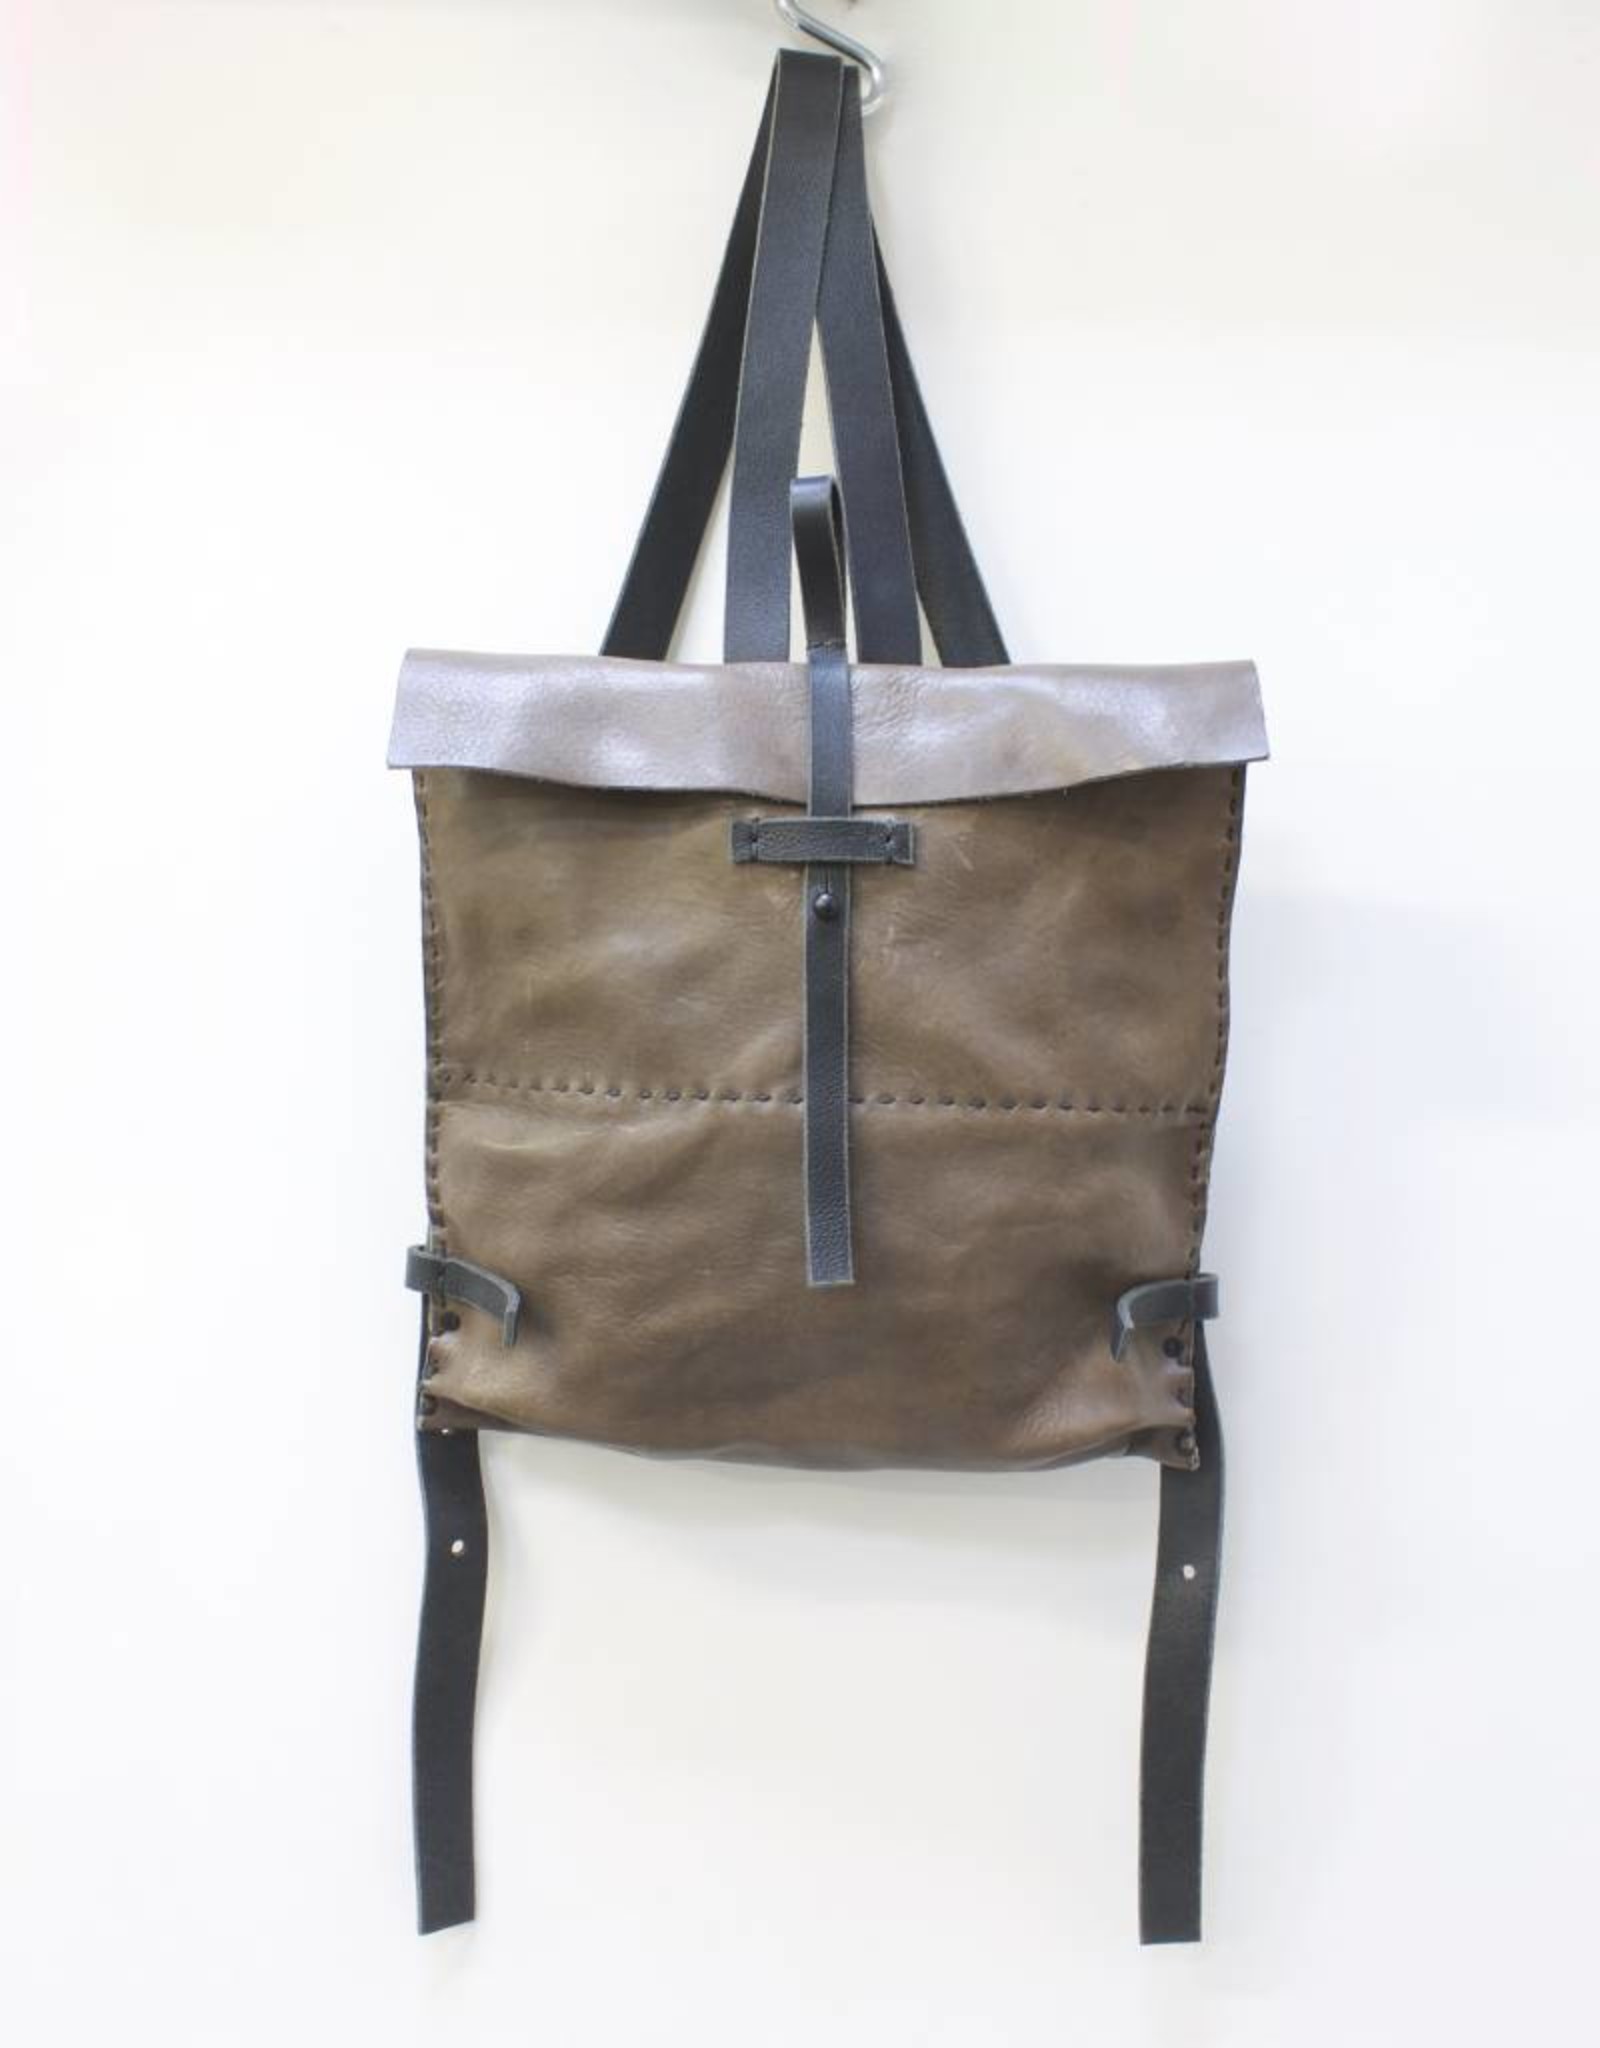 Engso Hand Crafted Convertible Leather Bag - Grey & Taupe